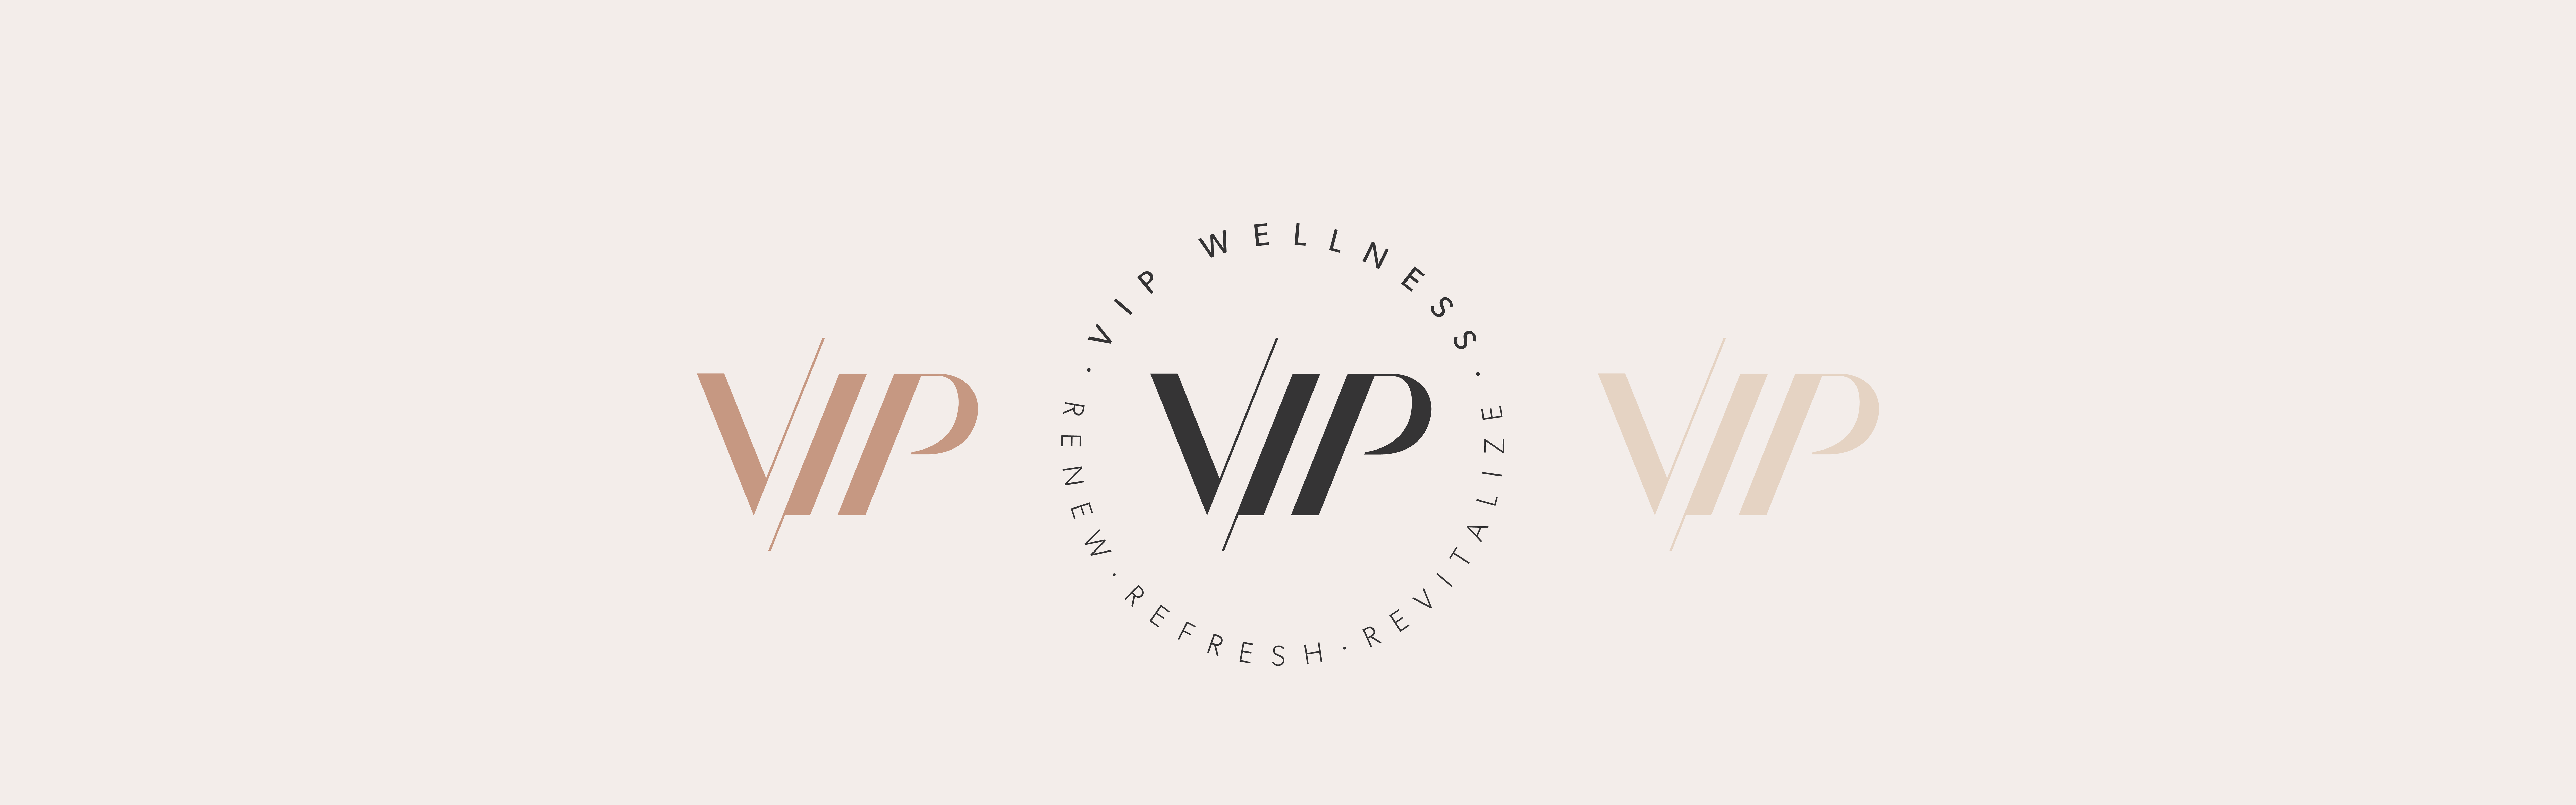 The image shows a graphic with the letters "VIP" at its center, repeated three times in a circular arrangement around the words "VIP Wellness" at the top and "refresh. revital.